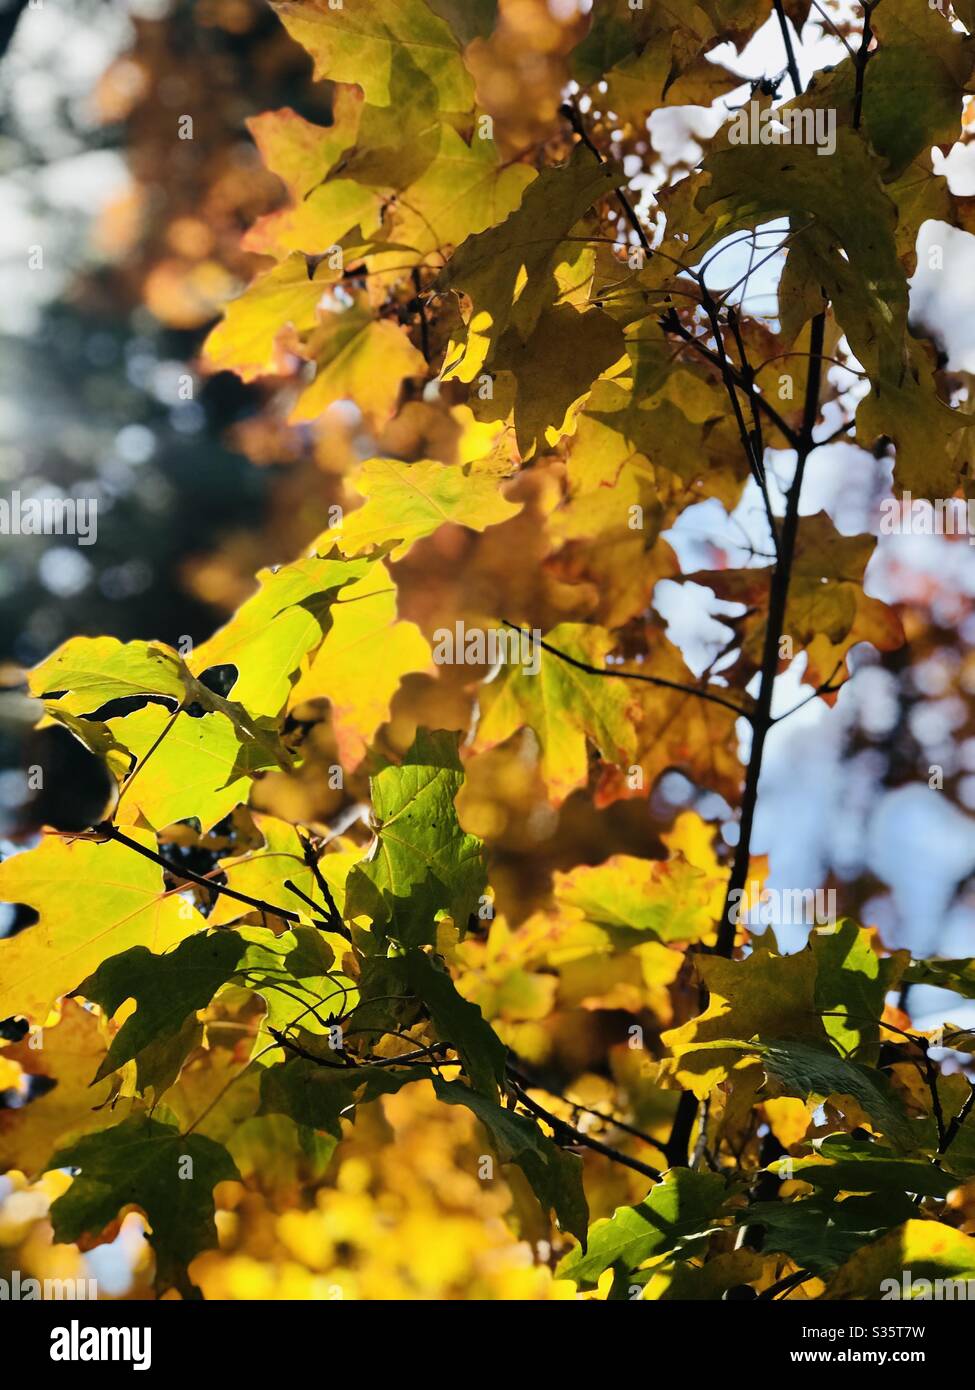 Green and yellow leaves radiate the late day sunlight and glow bright. Stock Photo